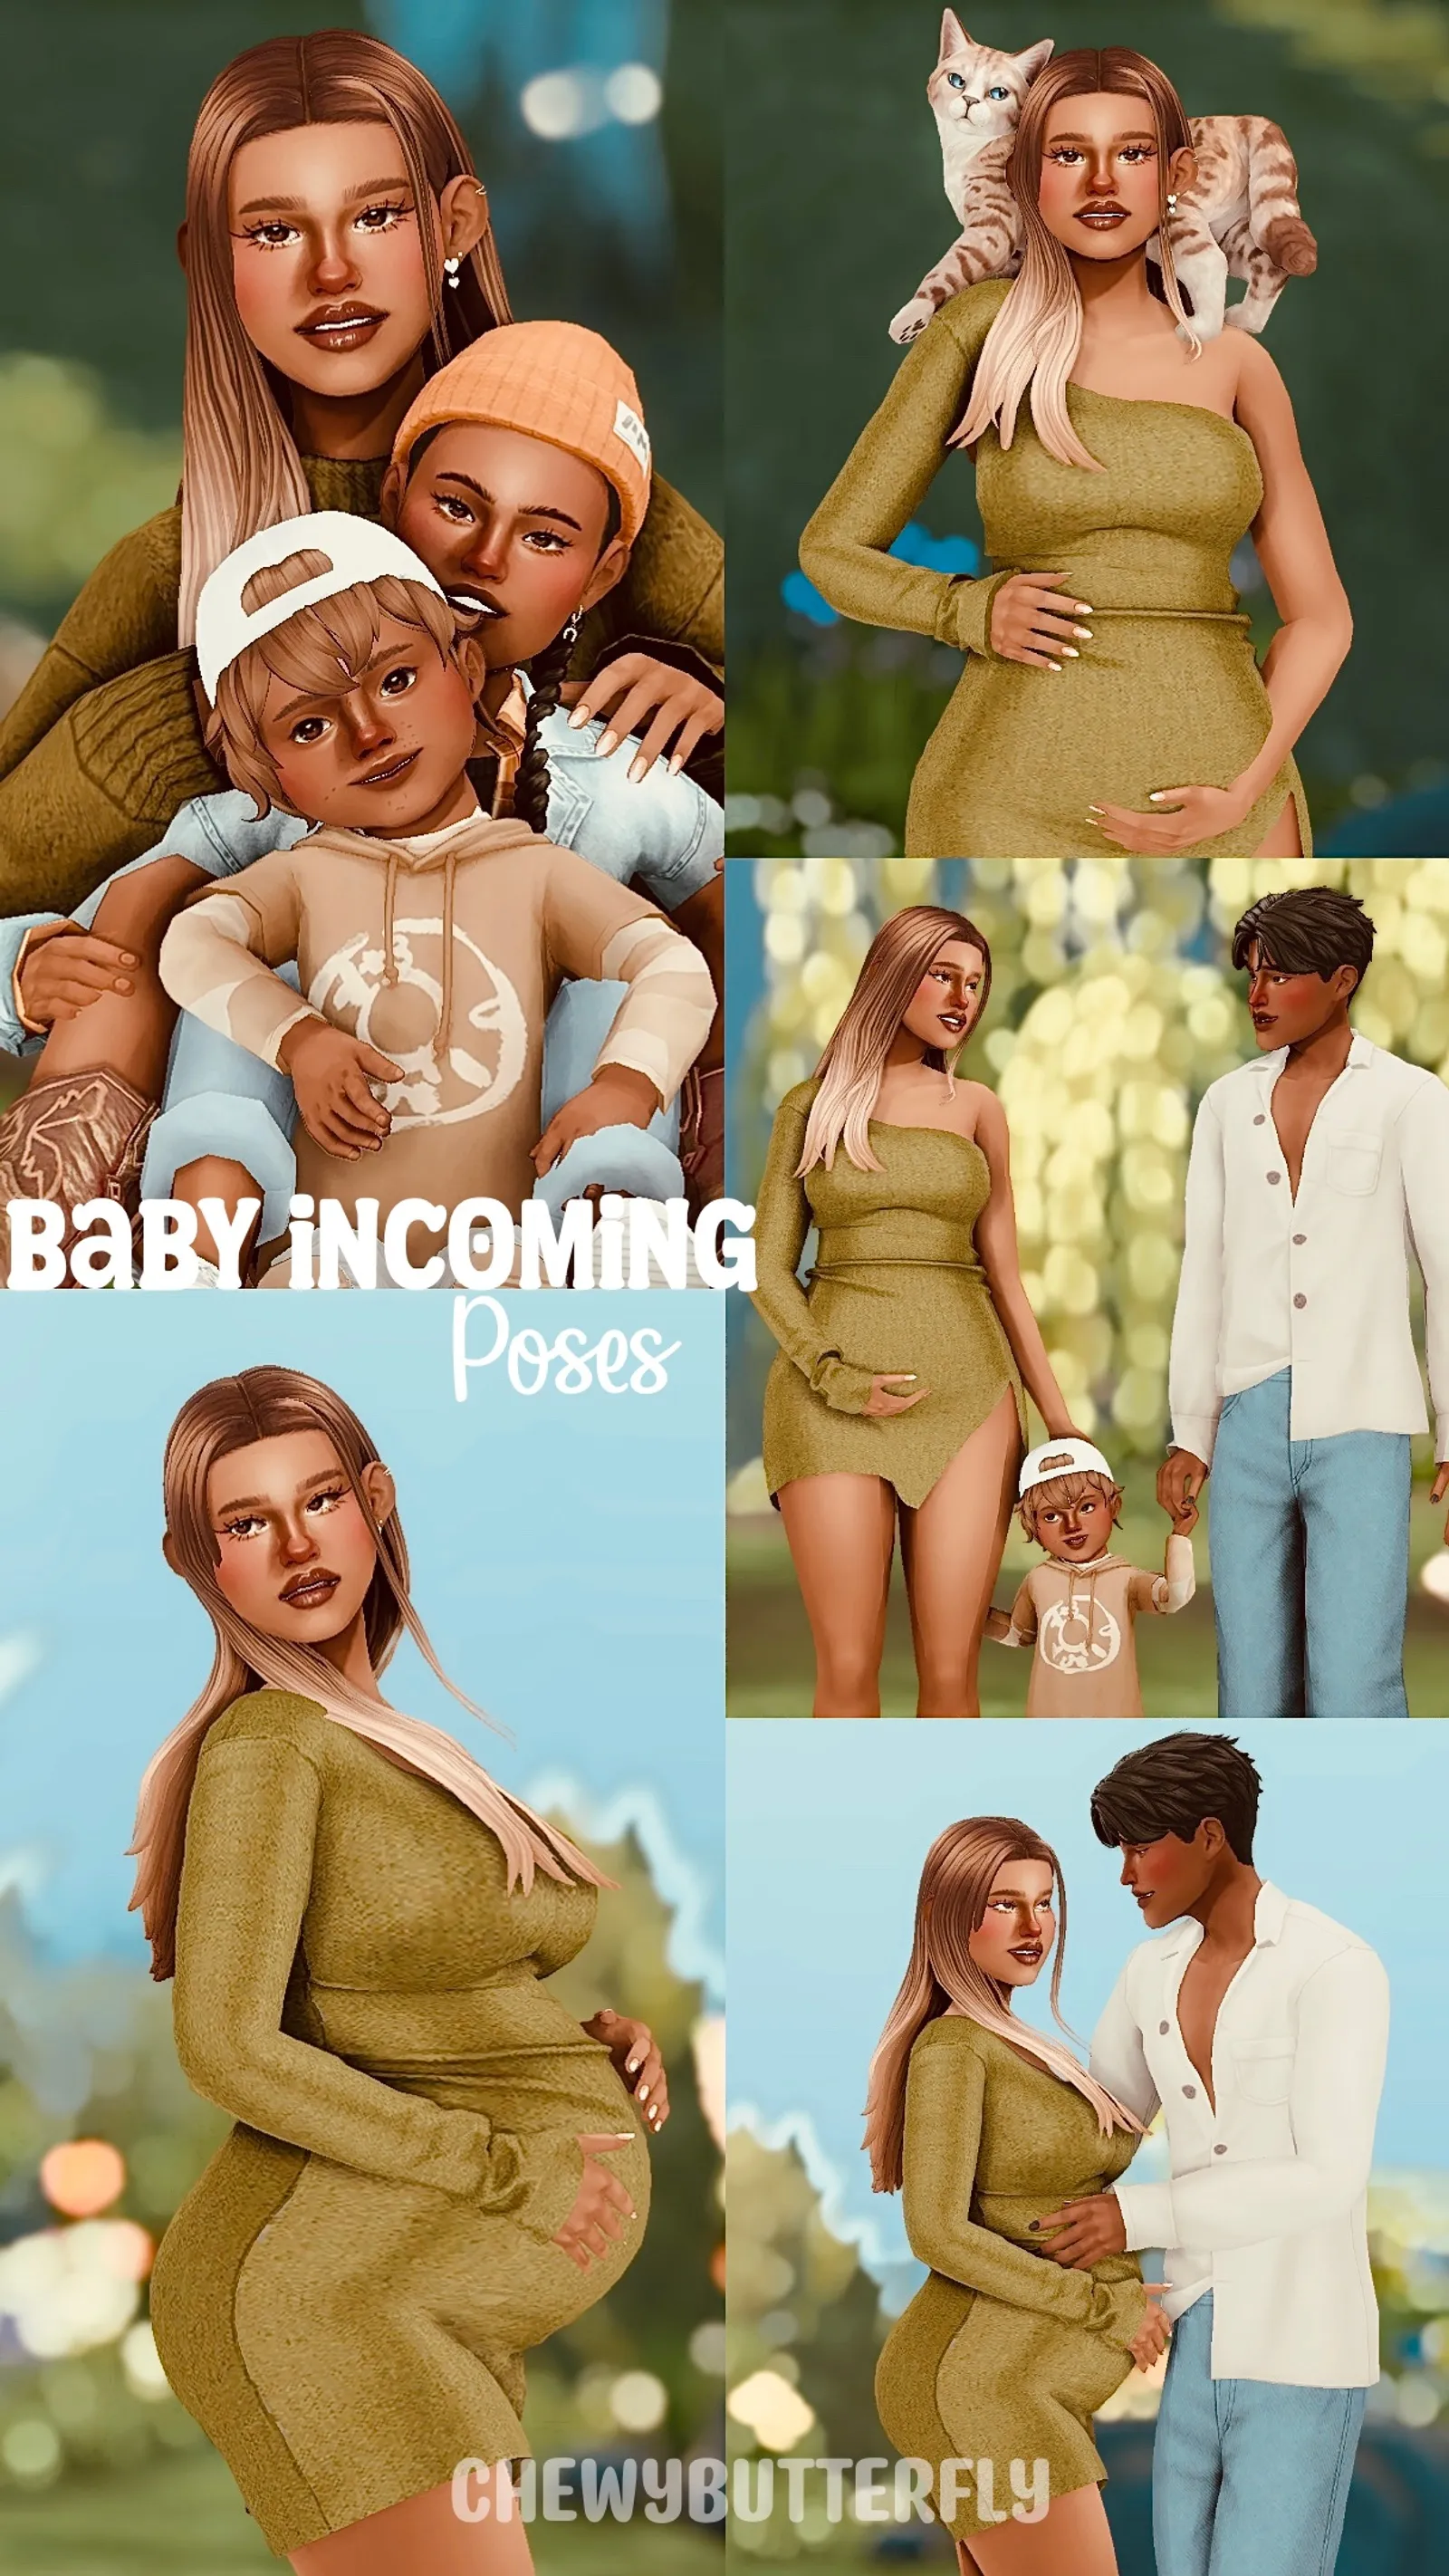 baby incoming poses